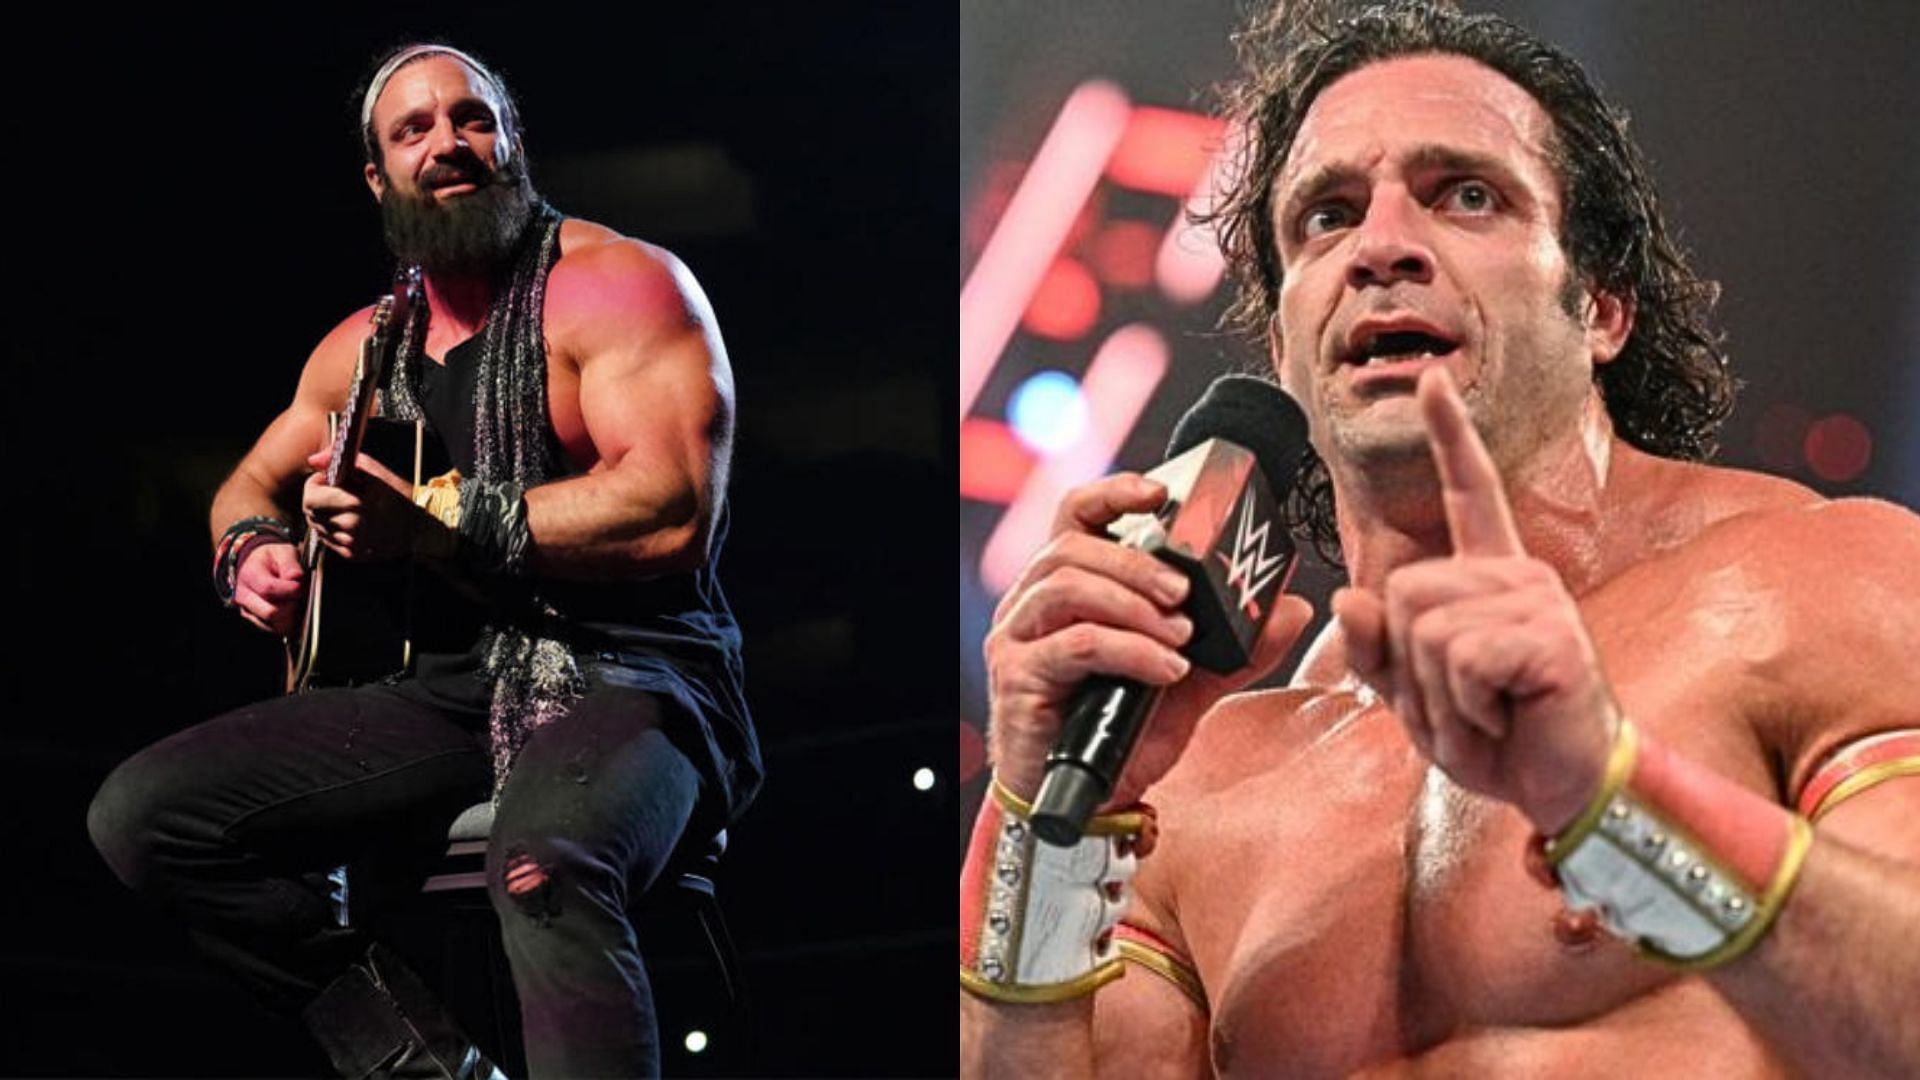 Elias (left) and his twin brother as part of WWE storyline, Ezekiel (right)